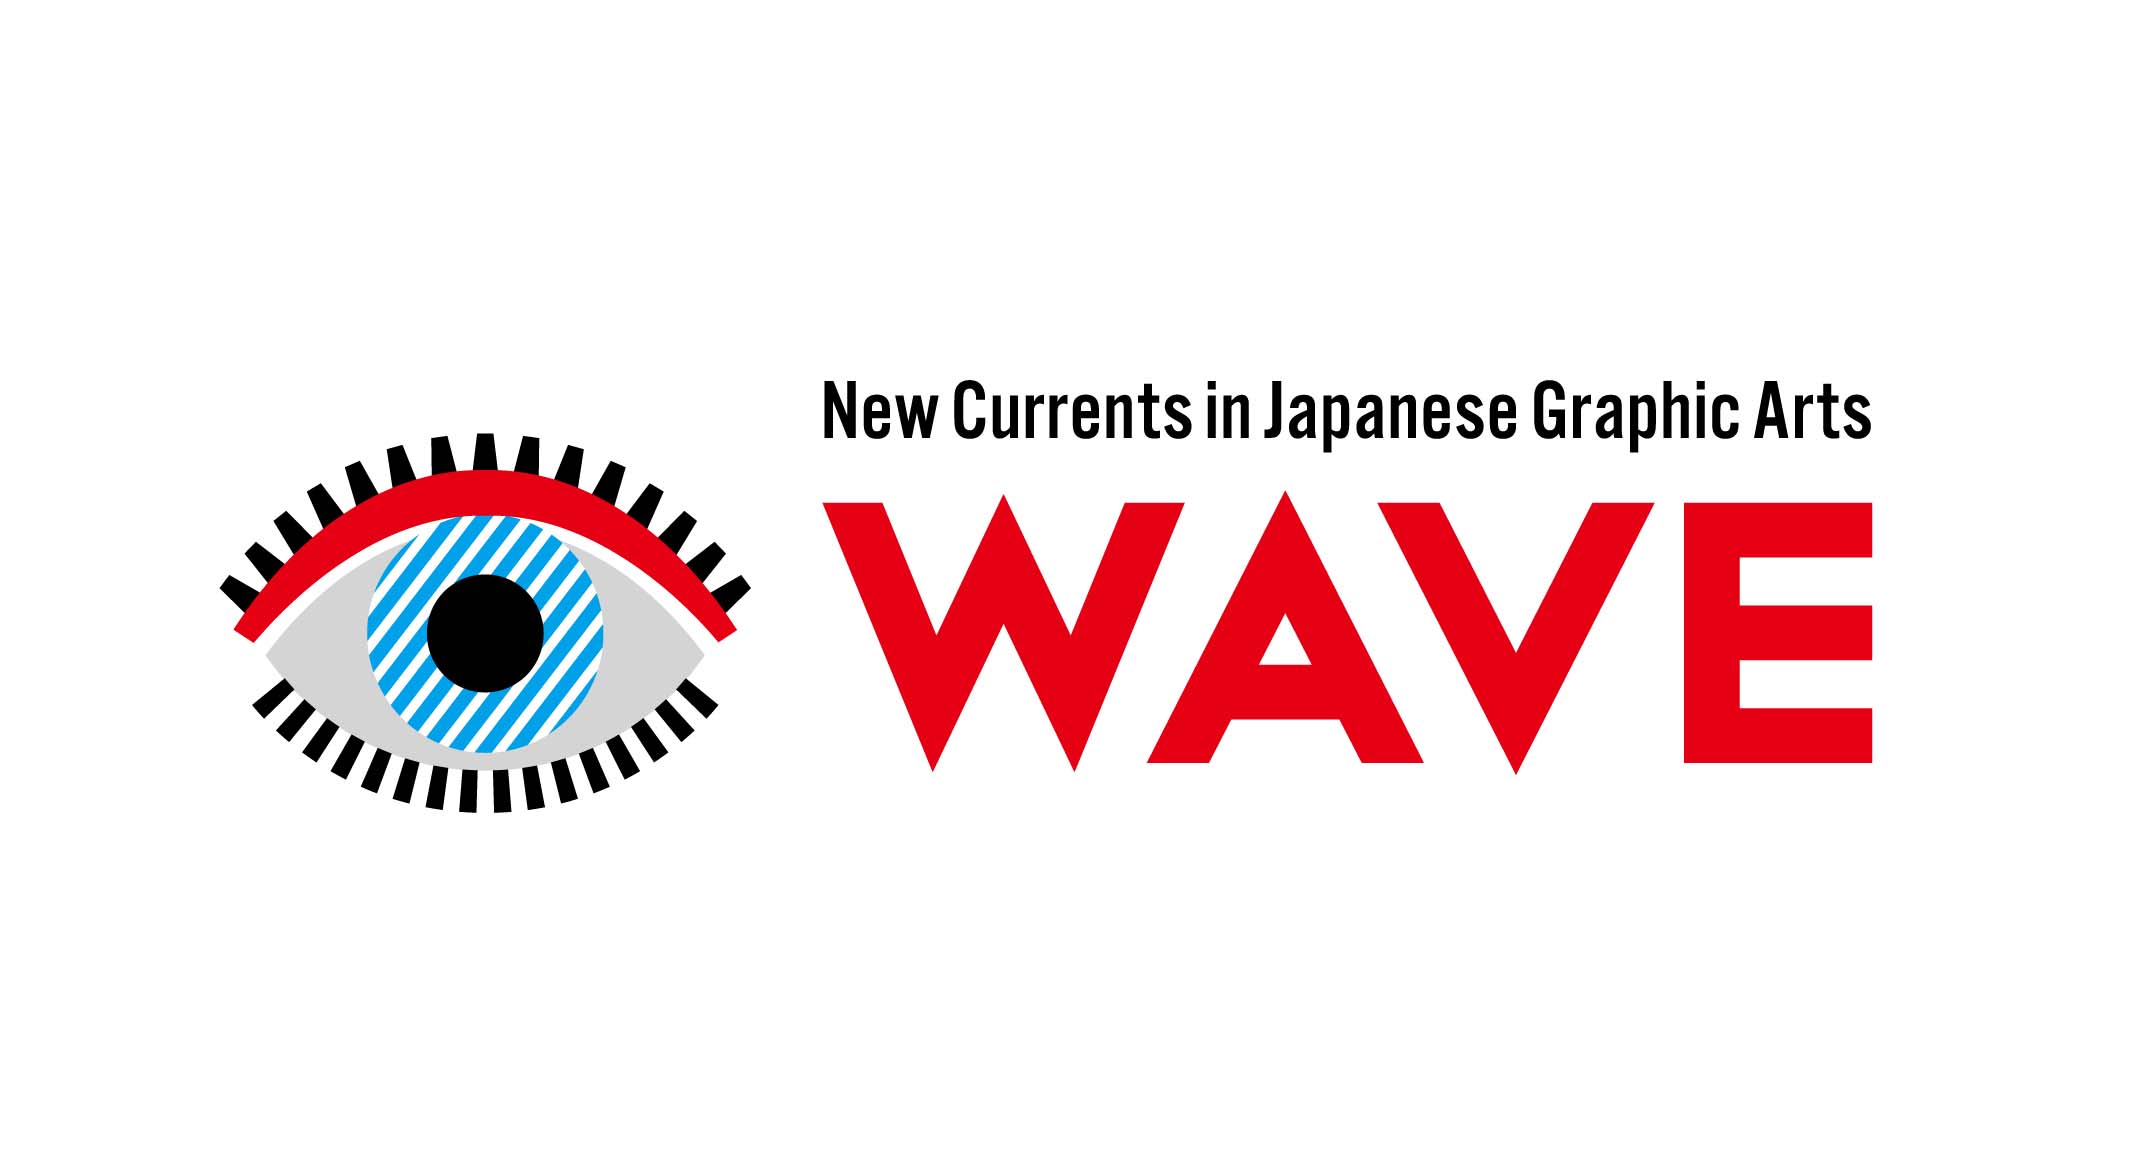 WAVE - New Currents in Japanese Graphic Arts